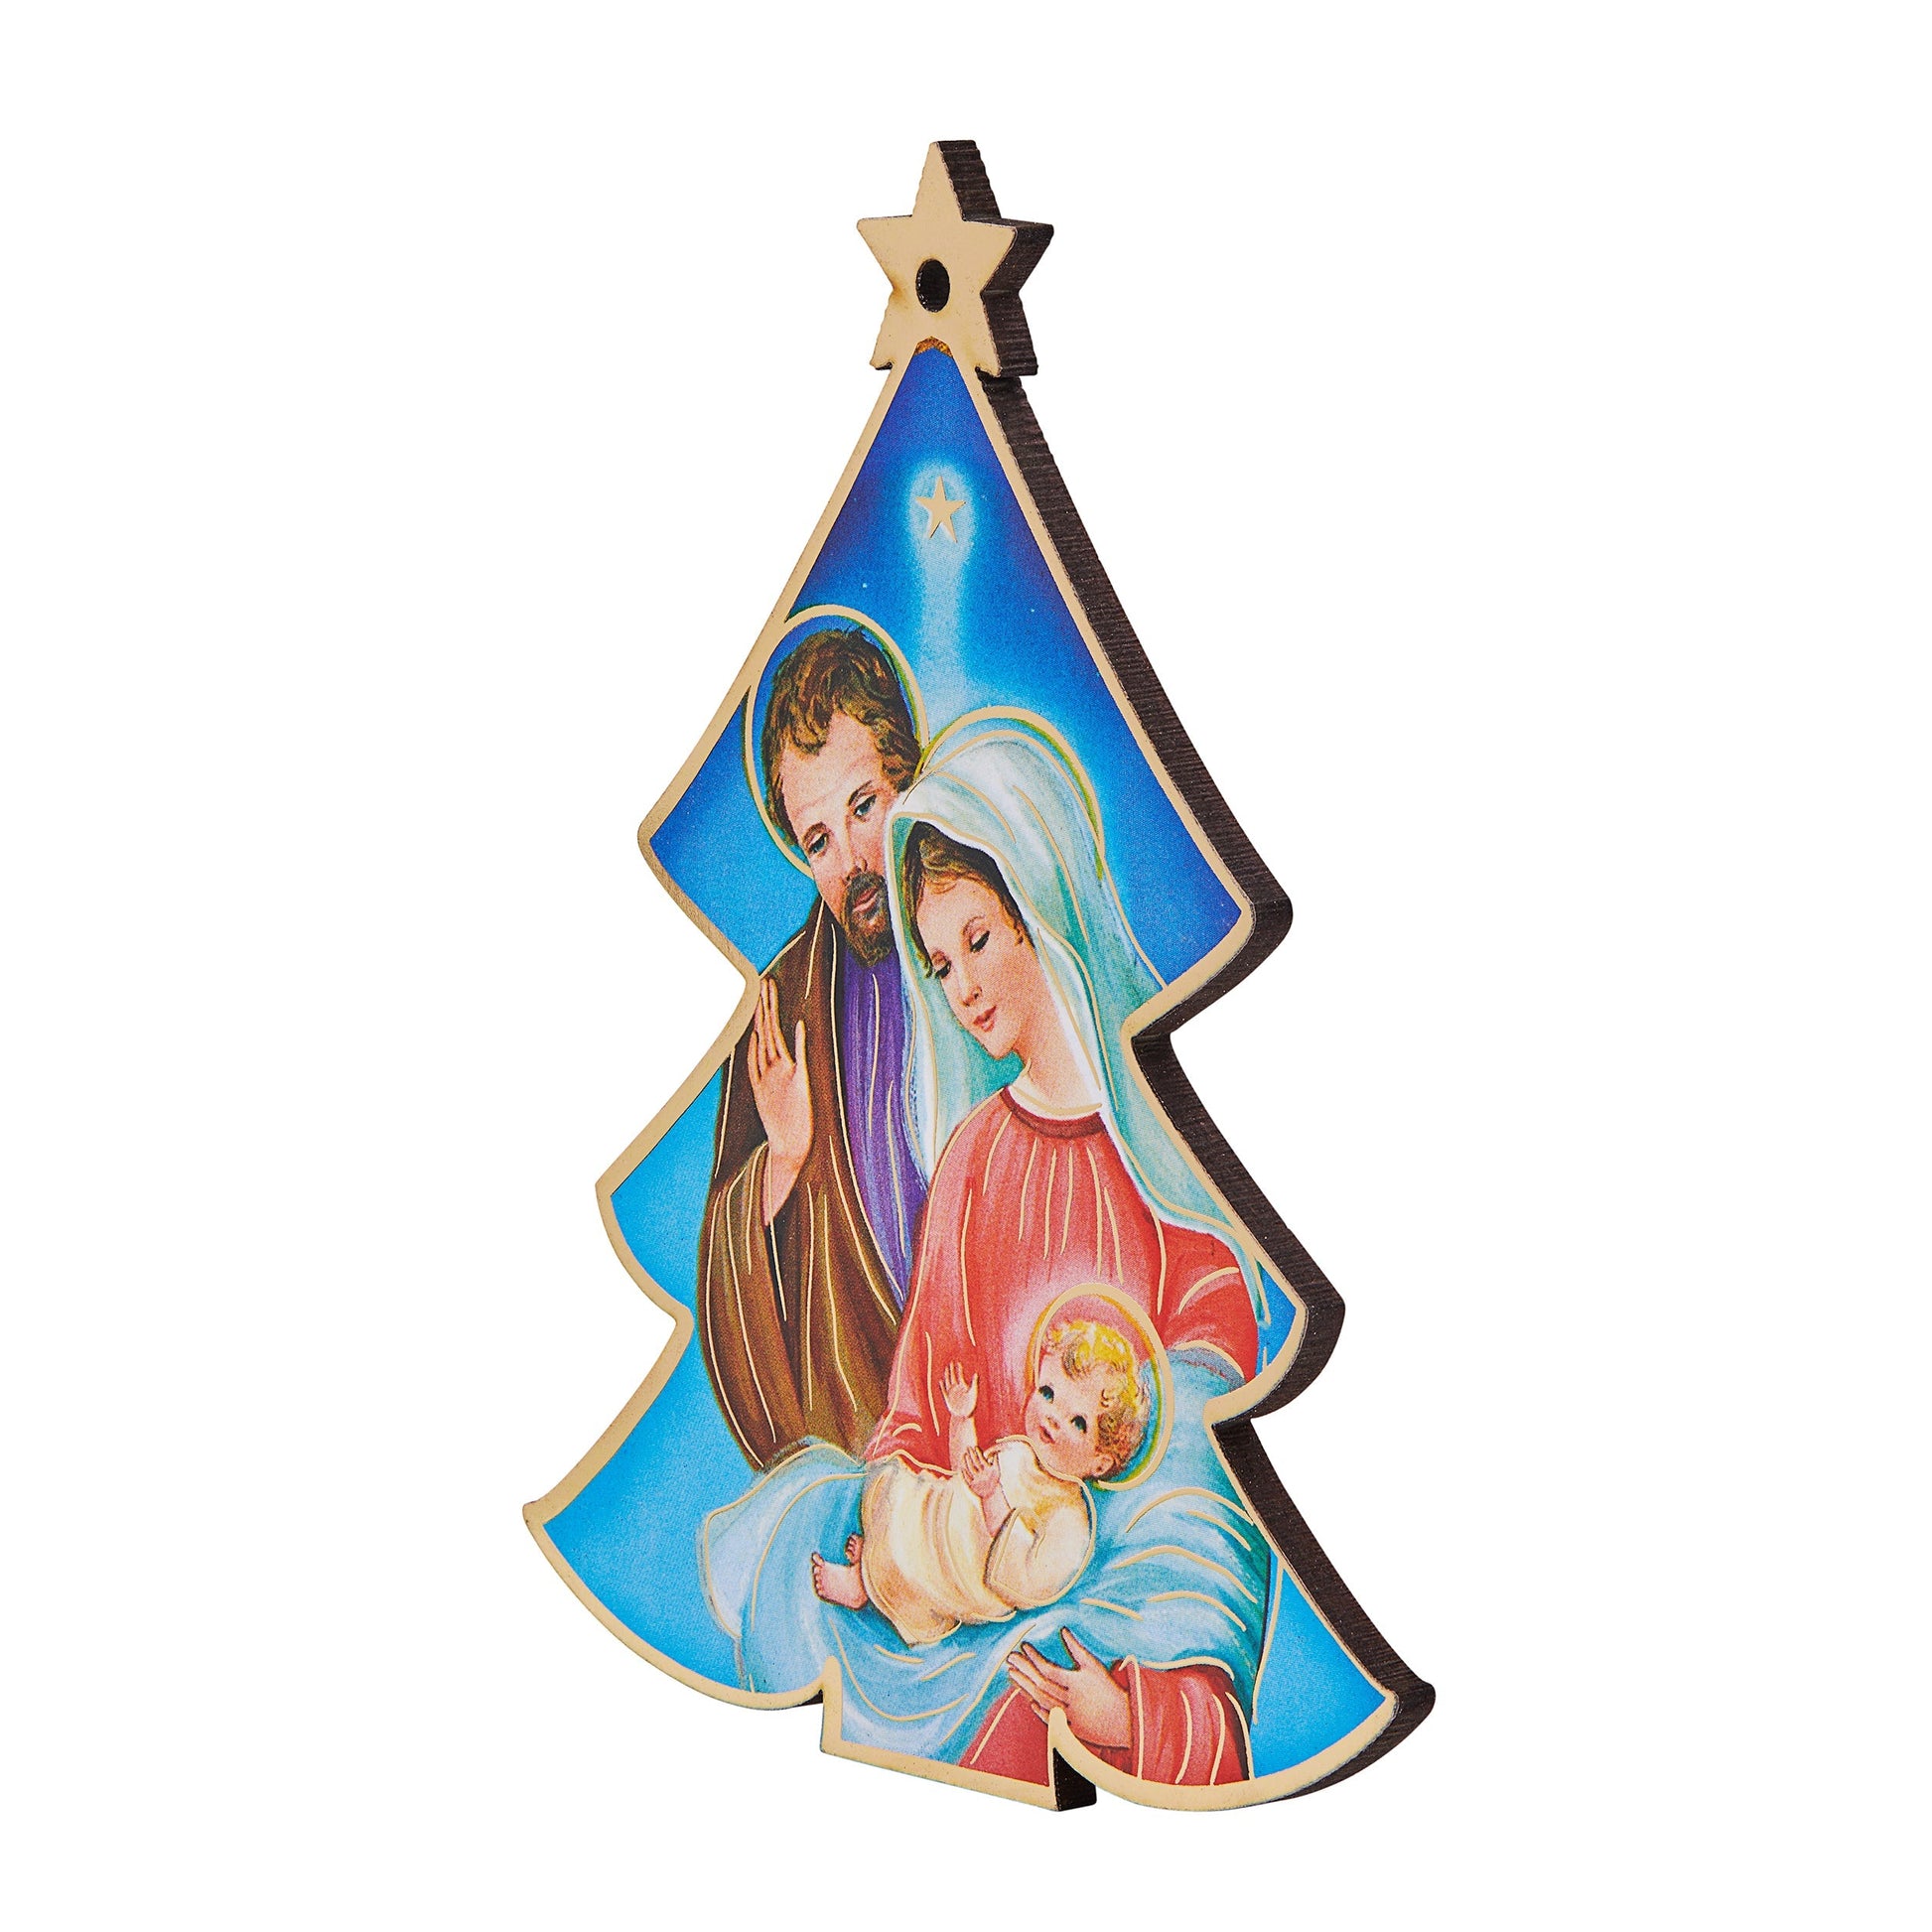 Mondo Cattolico 11 cm (4.33 in) Light Blue Christmas Tree-shaped Christmas Decoration With Nativity Scene